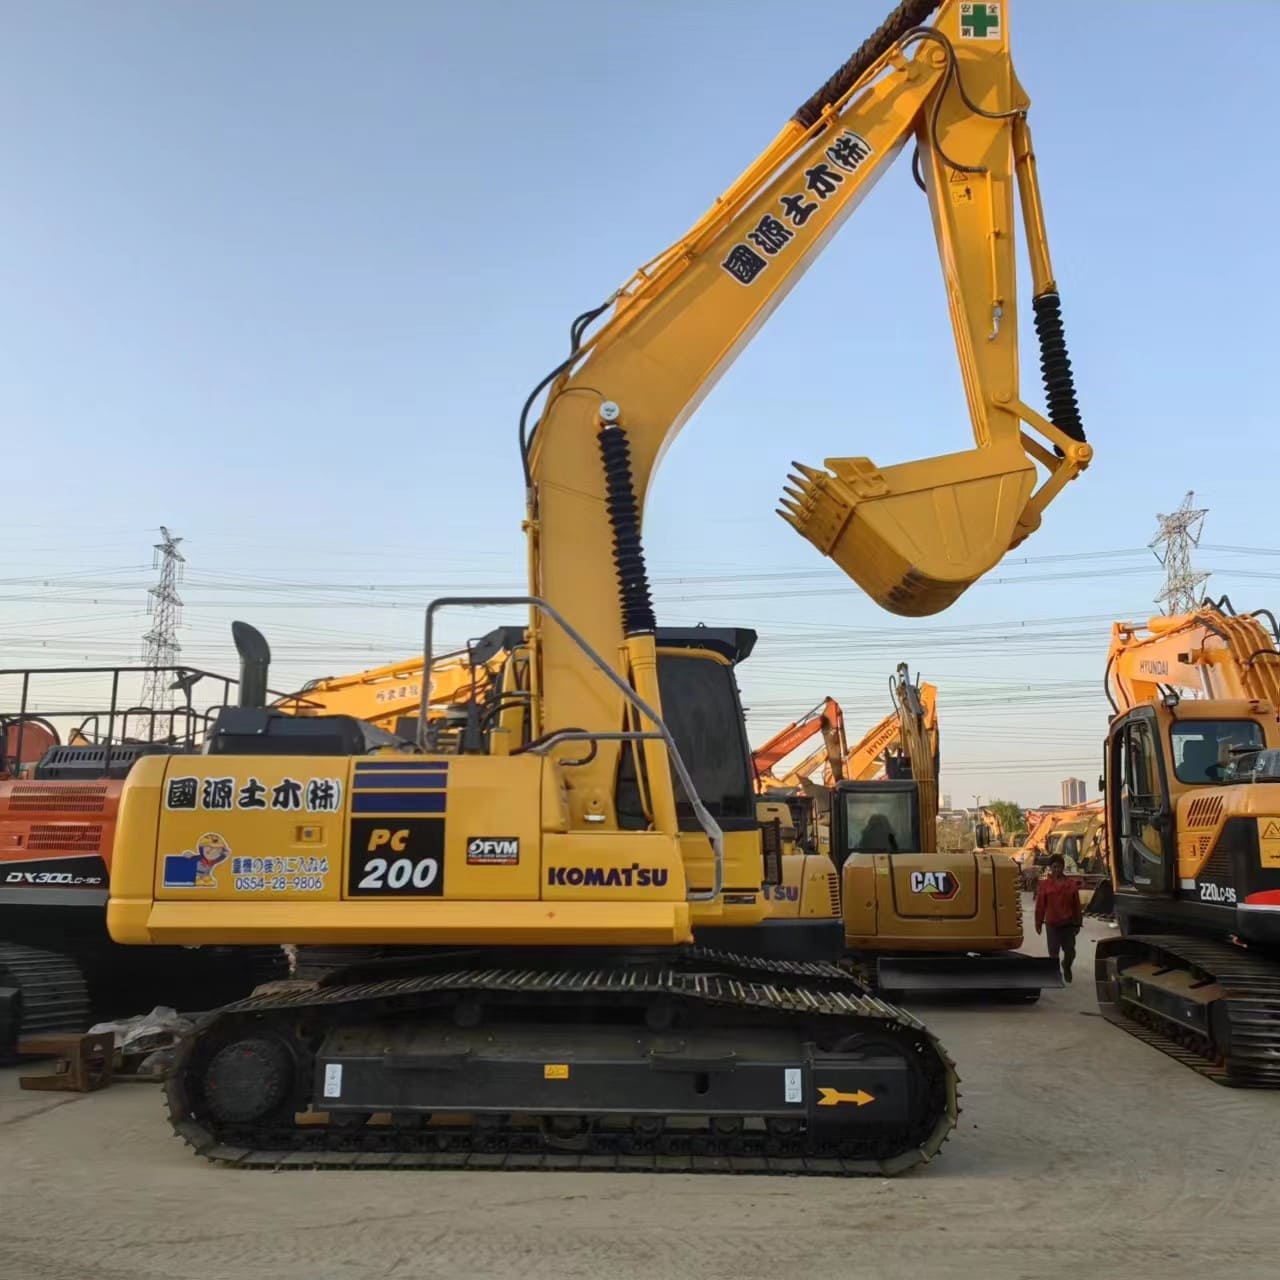 Second Hand Excavators – Things You Should Know